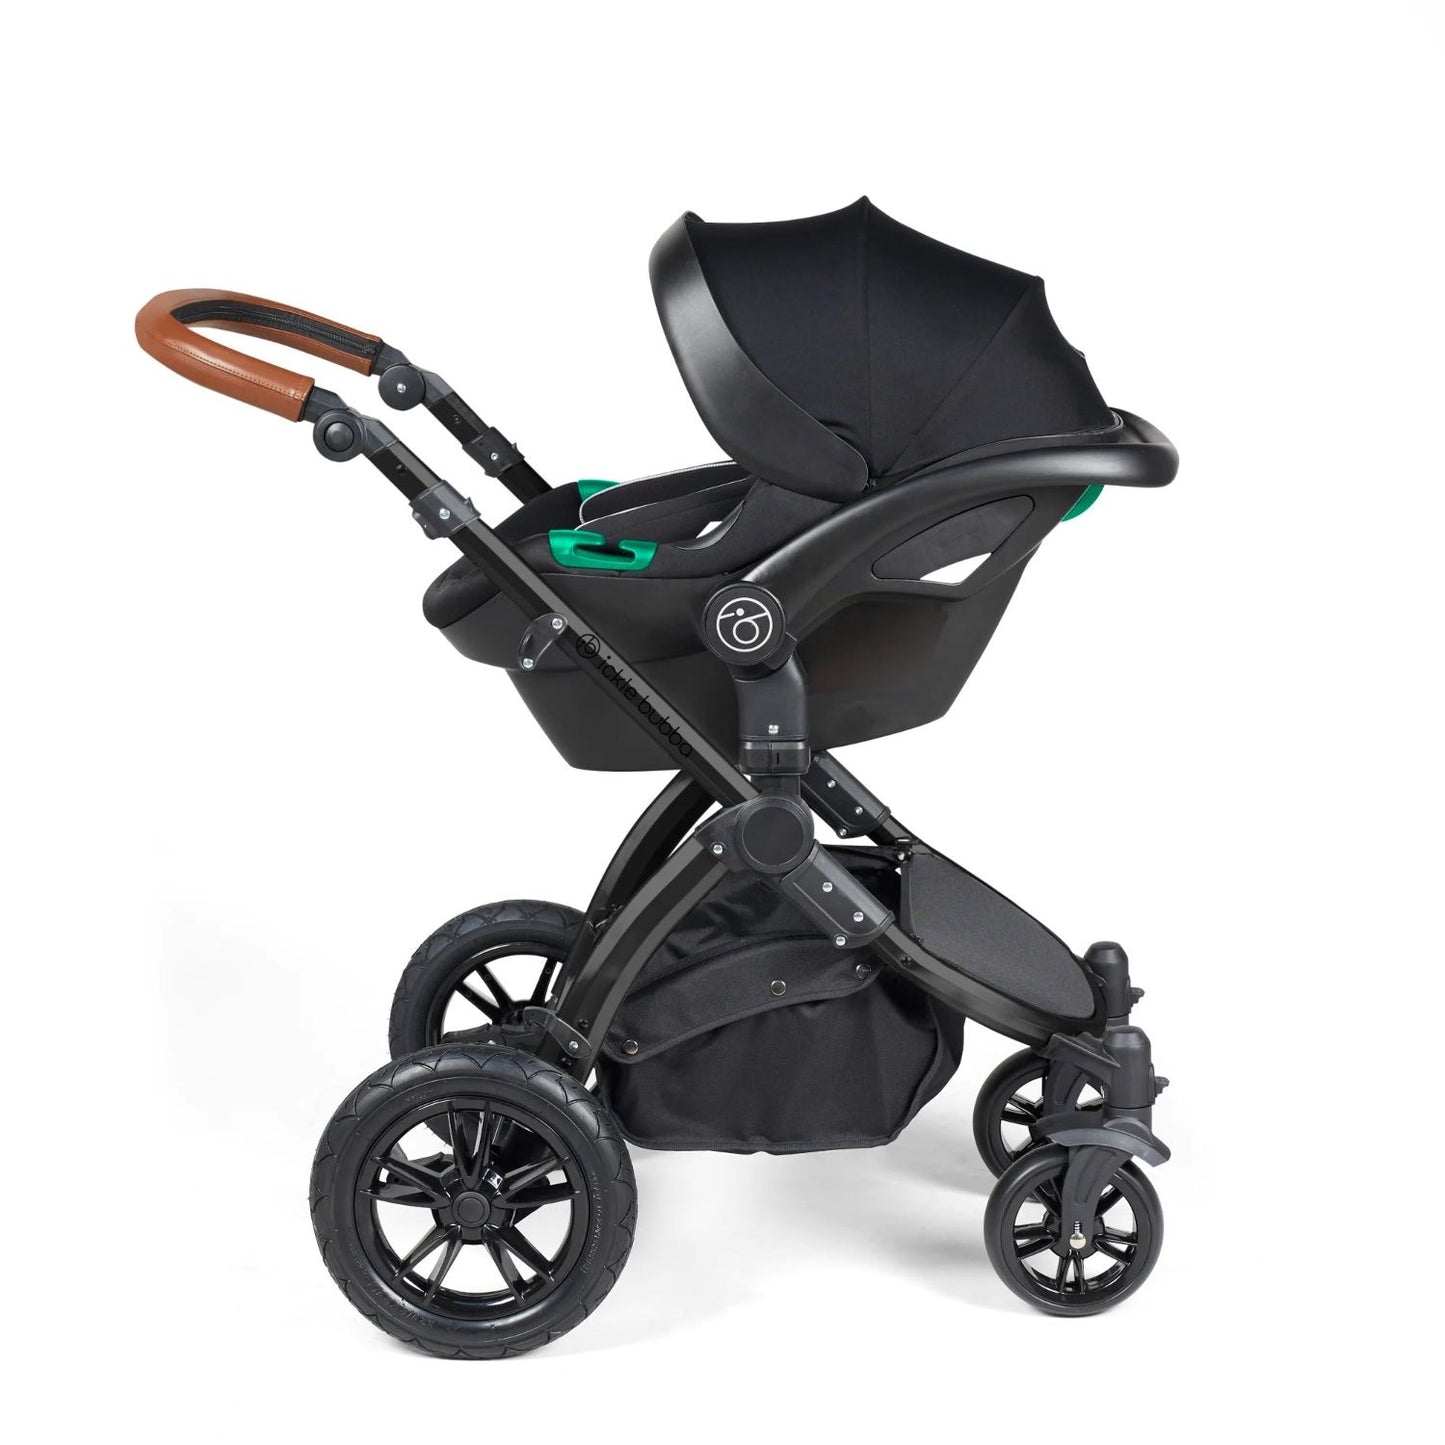 Ickle Bubba Stomp Luxe Pushchair with Stratus i-Size car seat attached in Woodland green colour with tan handle